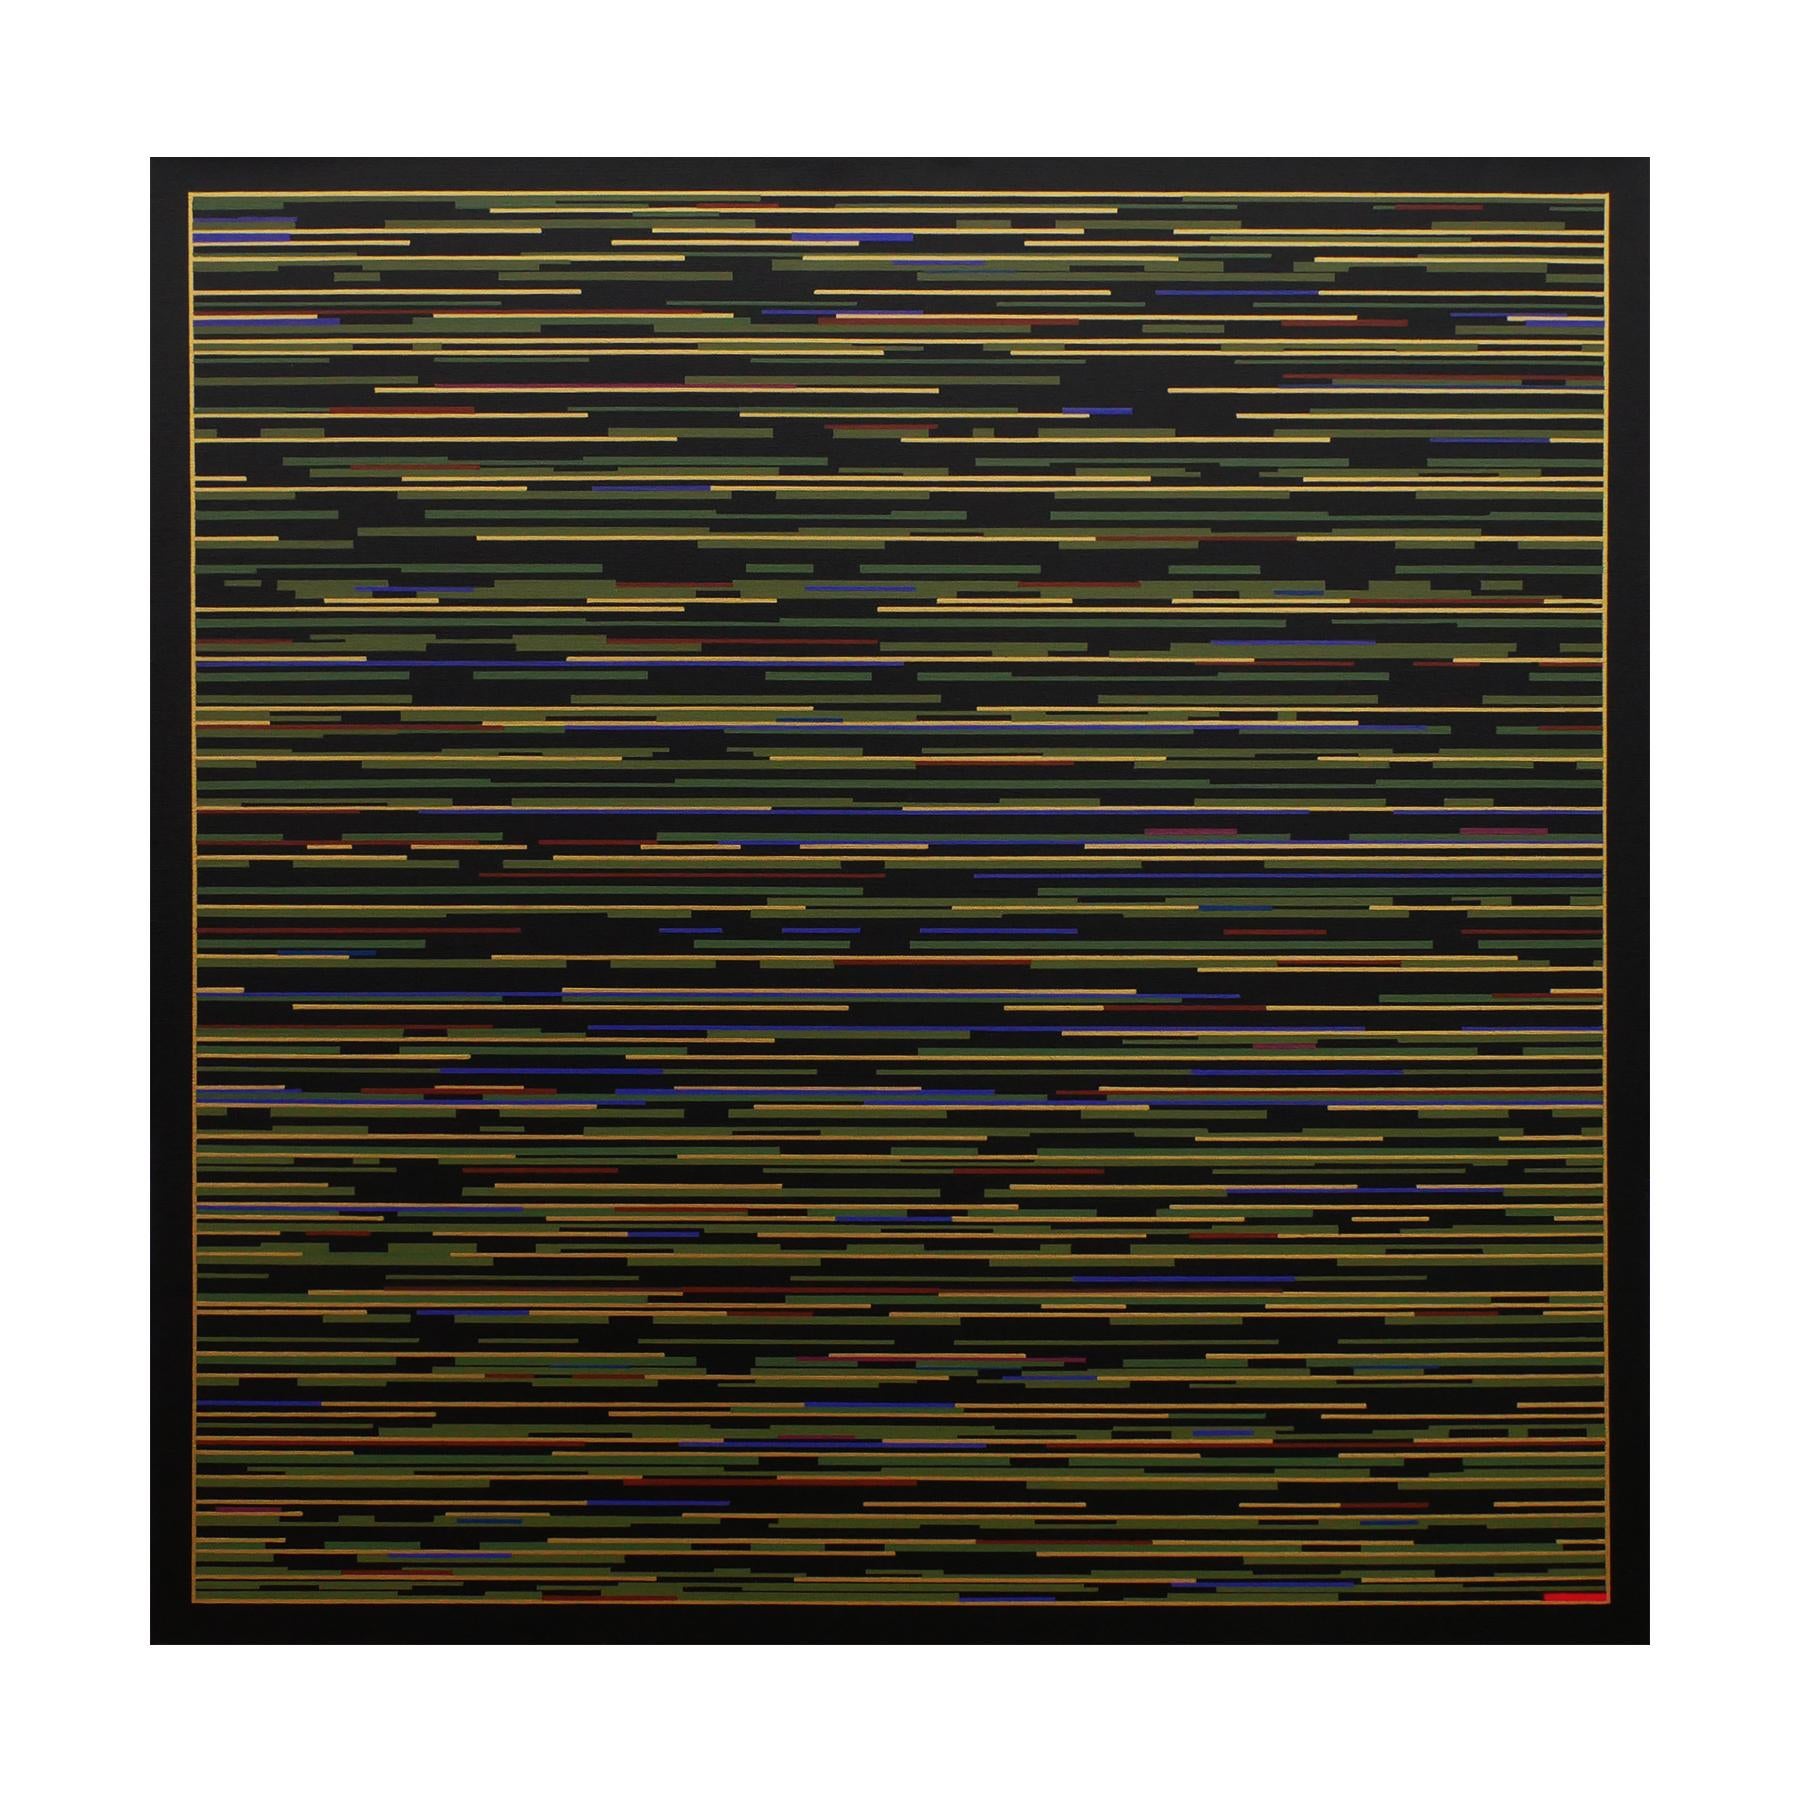 Contemporary abstract geometric painting by artist Mark Byckowski. The work is featured in a series of paintings. The work features horizontal lines with a variety of vivid colors of red, blue, green, and yellow, painted on a black background. Each